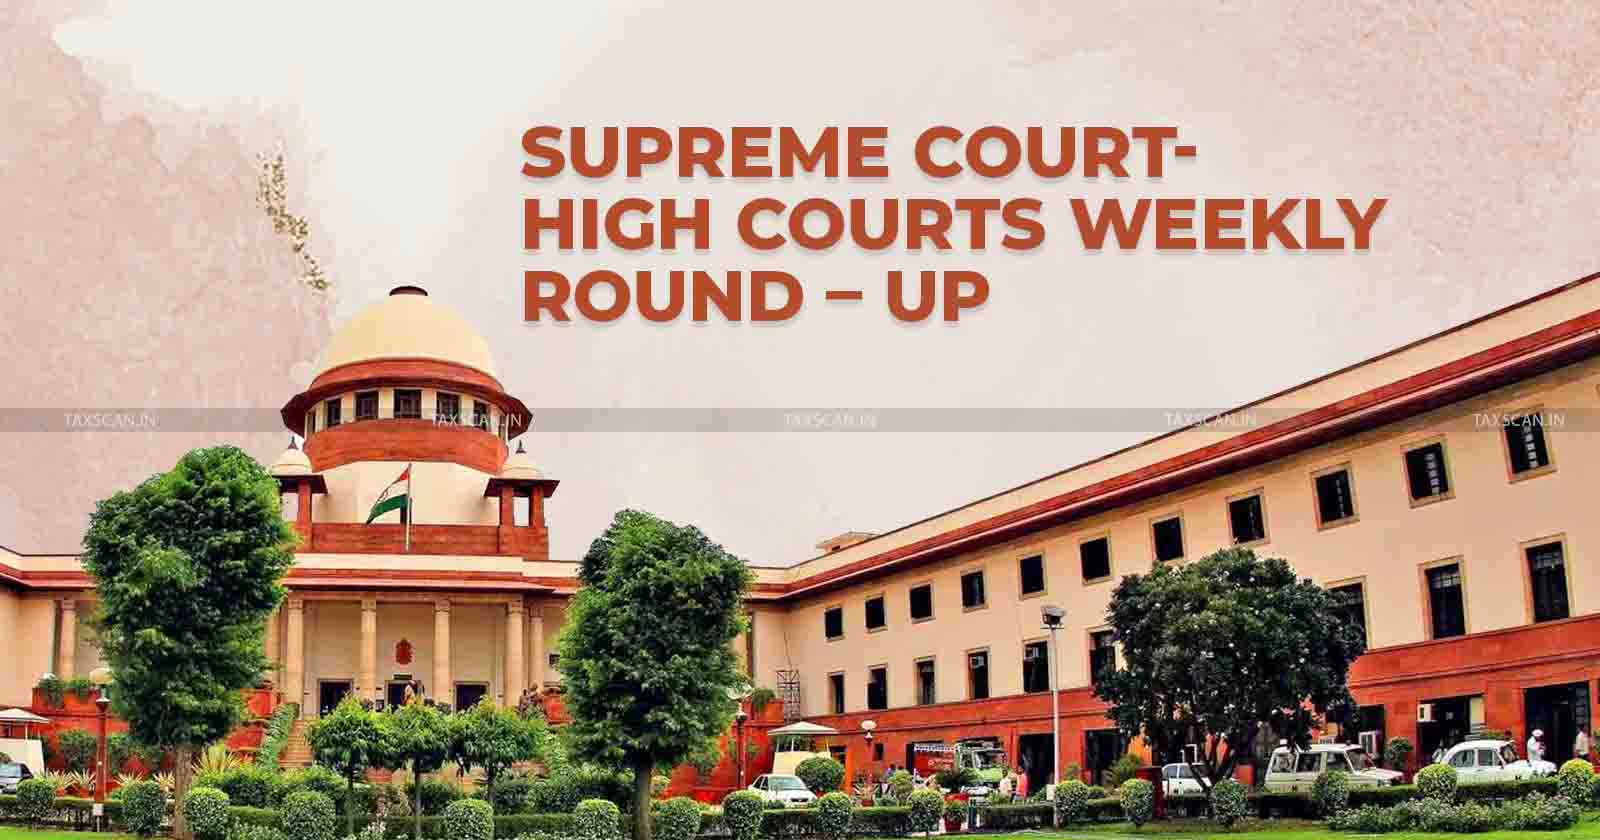 Supreme Court - High Courts - Tax judgments - Weekly round up - Supreme court weekly round up - High courts weekly round up - taxscan